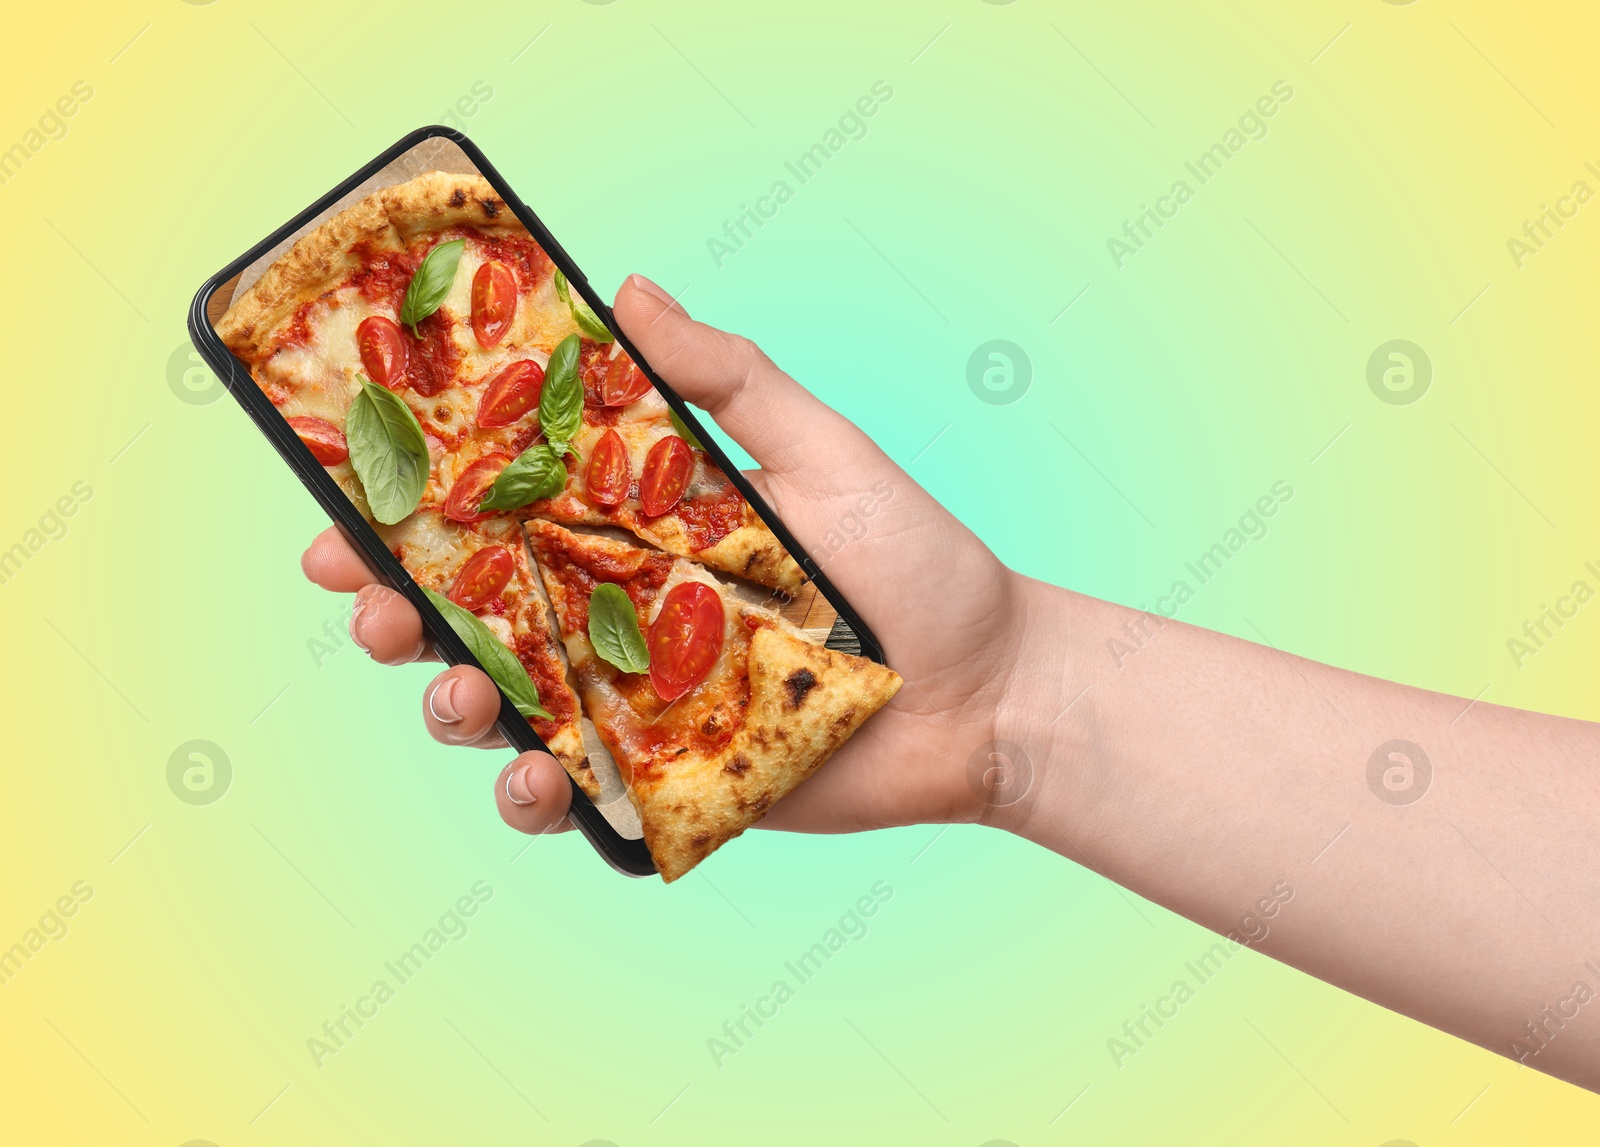 Image of Online food ordering. Woman holding smartphone with pizza on screen against color gradient background, closeup. One slice sticking out of device